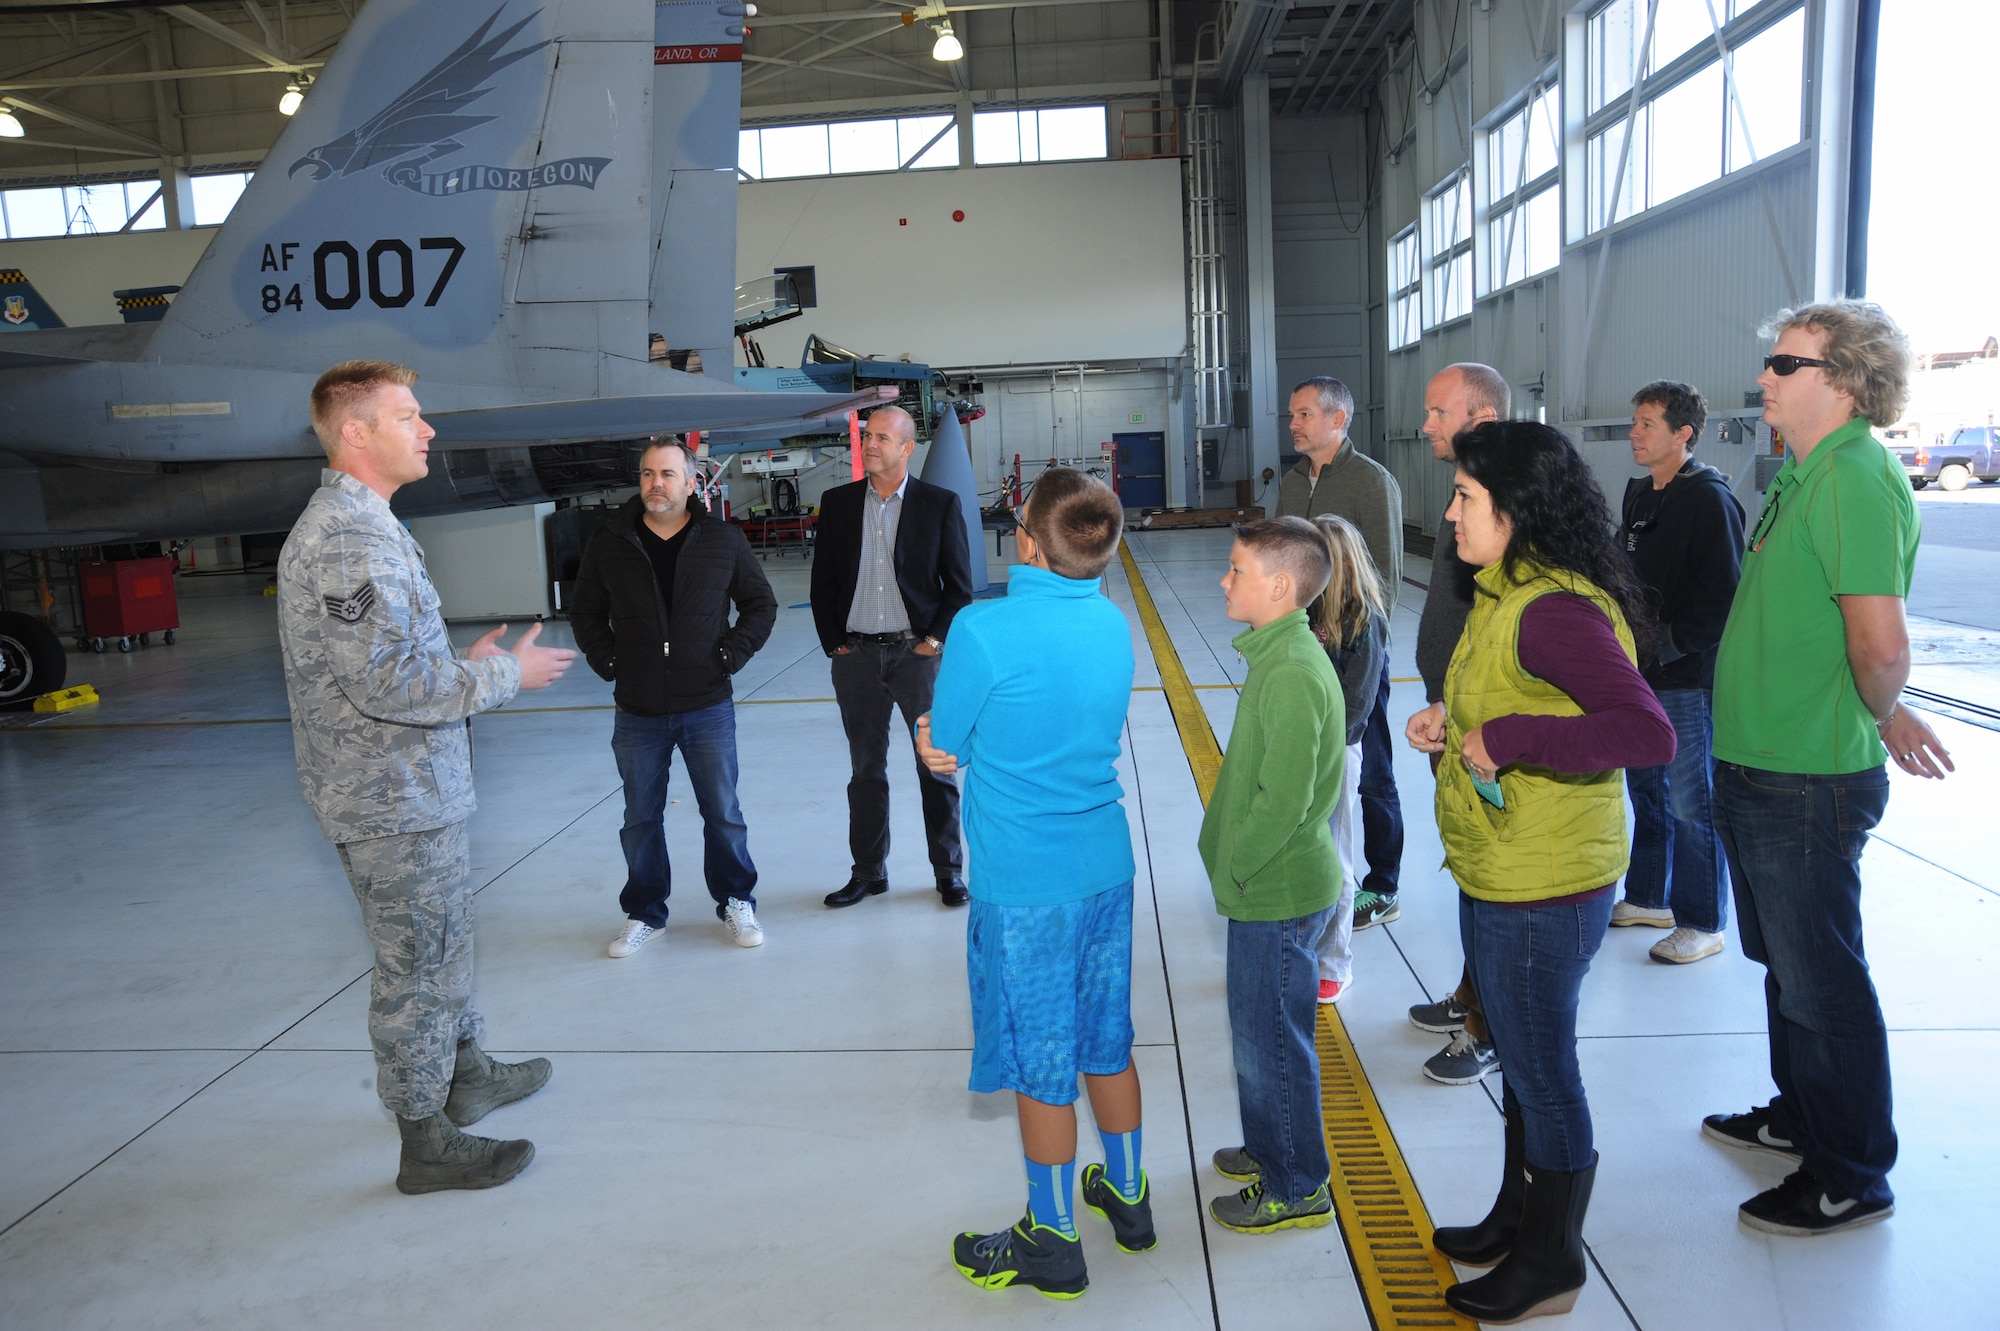 Staff Sgt. Nick Hicks, assigned to the 142nd Fighter Wing Aircraft Maintenance Squadron, leads a tour group around aircraft 84-007, Oct. 16, 2014, a week before the test flight and after nearly two years of repairs, Portland Air National Guard Base, Ore. (U.S. Air National photo by Tech. Sgt. John Hughel, 142nd Fighter Wing Public Affairs)